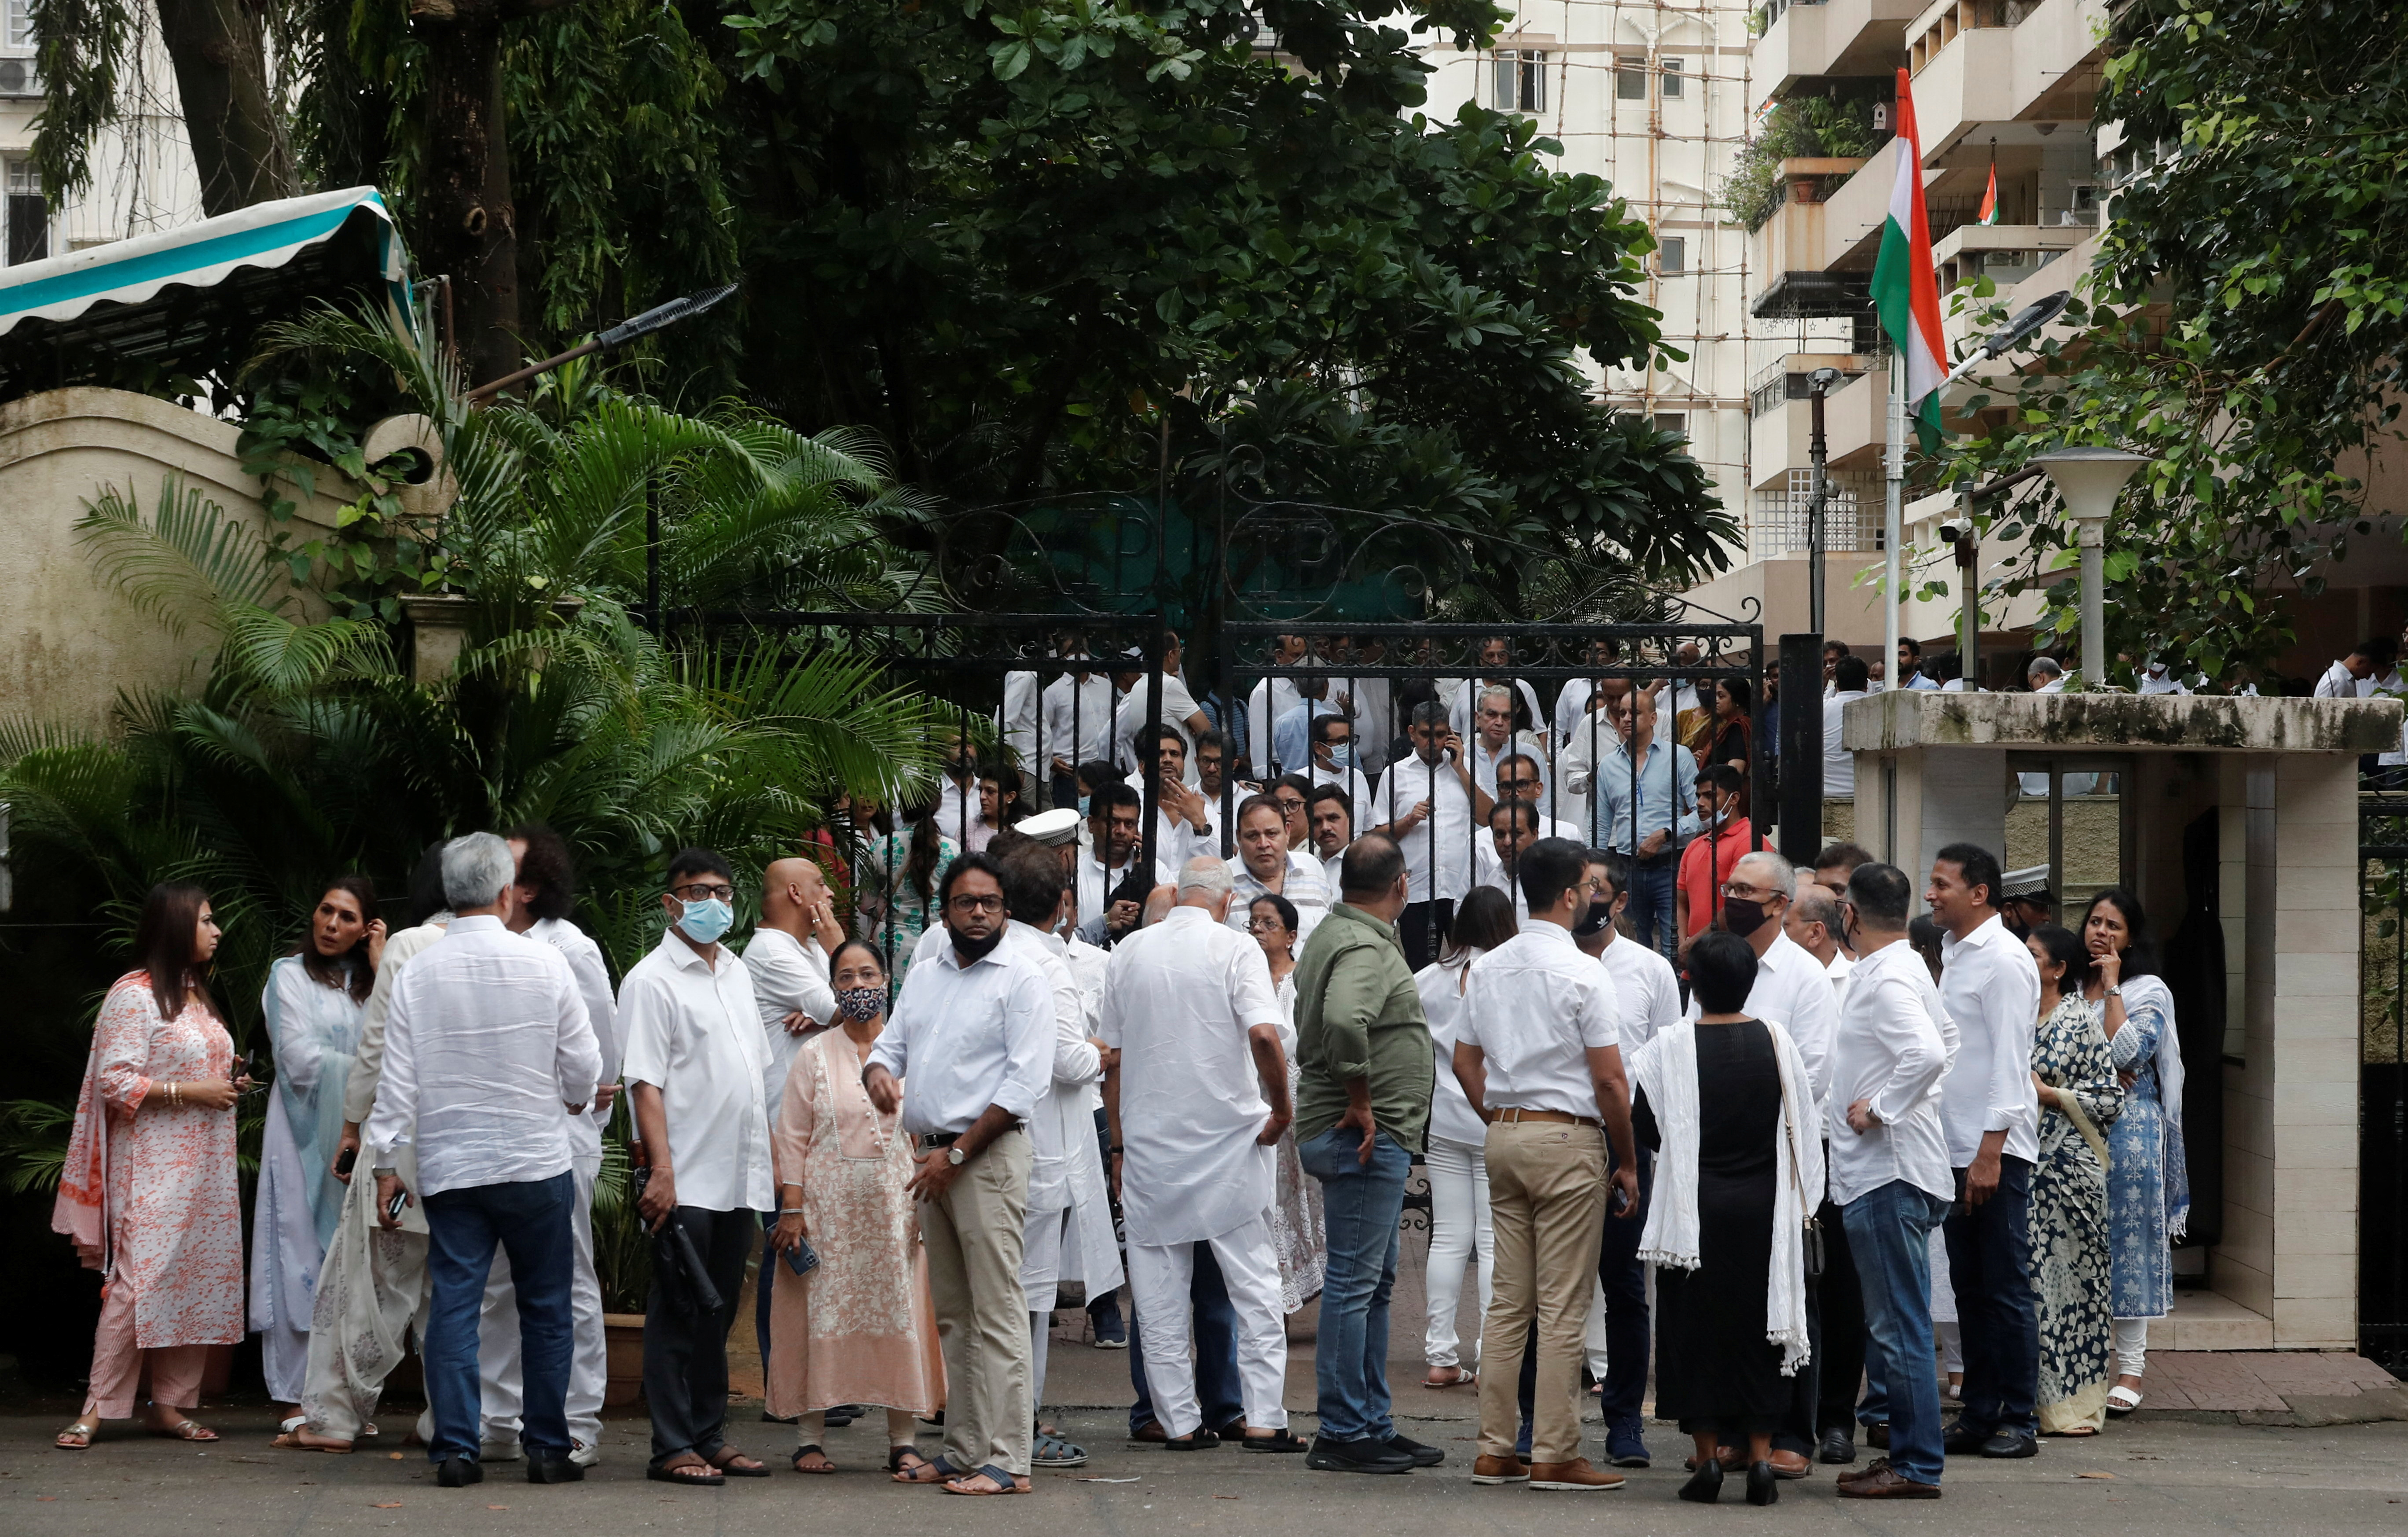 People Are Seen Outside The Residence Of Late Indian Billionaire Rakesh Jhunjhunwala After His Death Today In Mumbai, India, August 14, 2022.  Reuters/Francis Mascarenhas